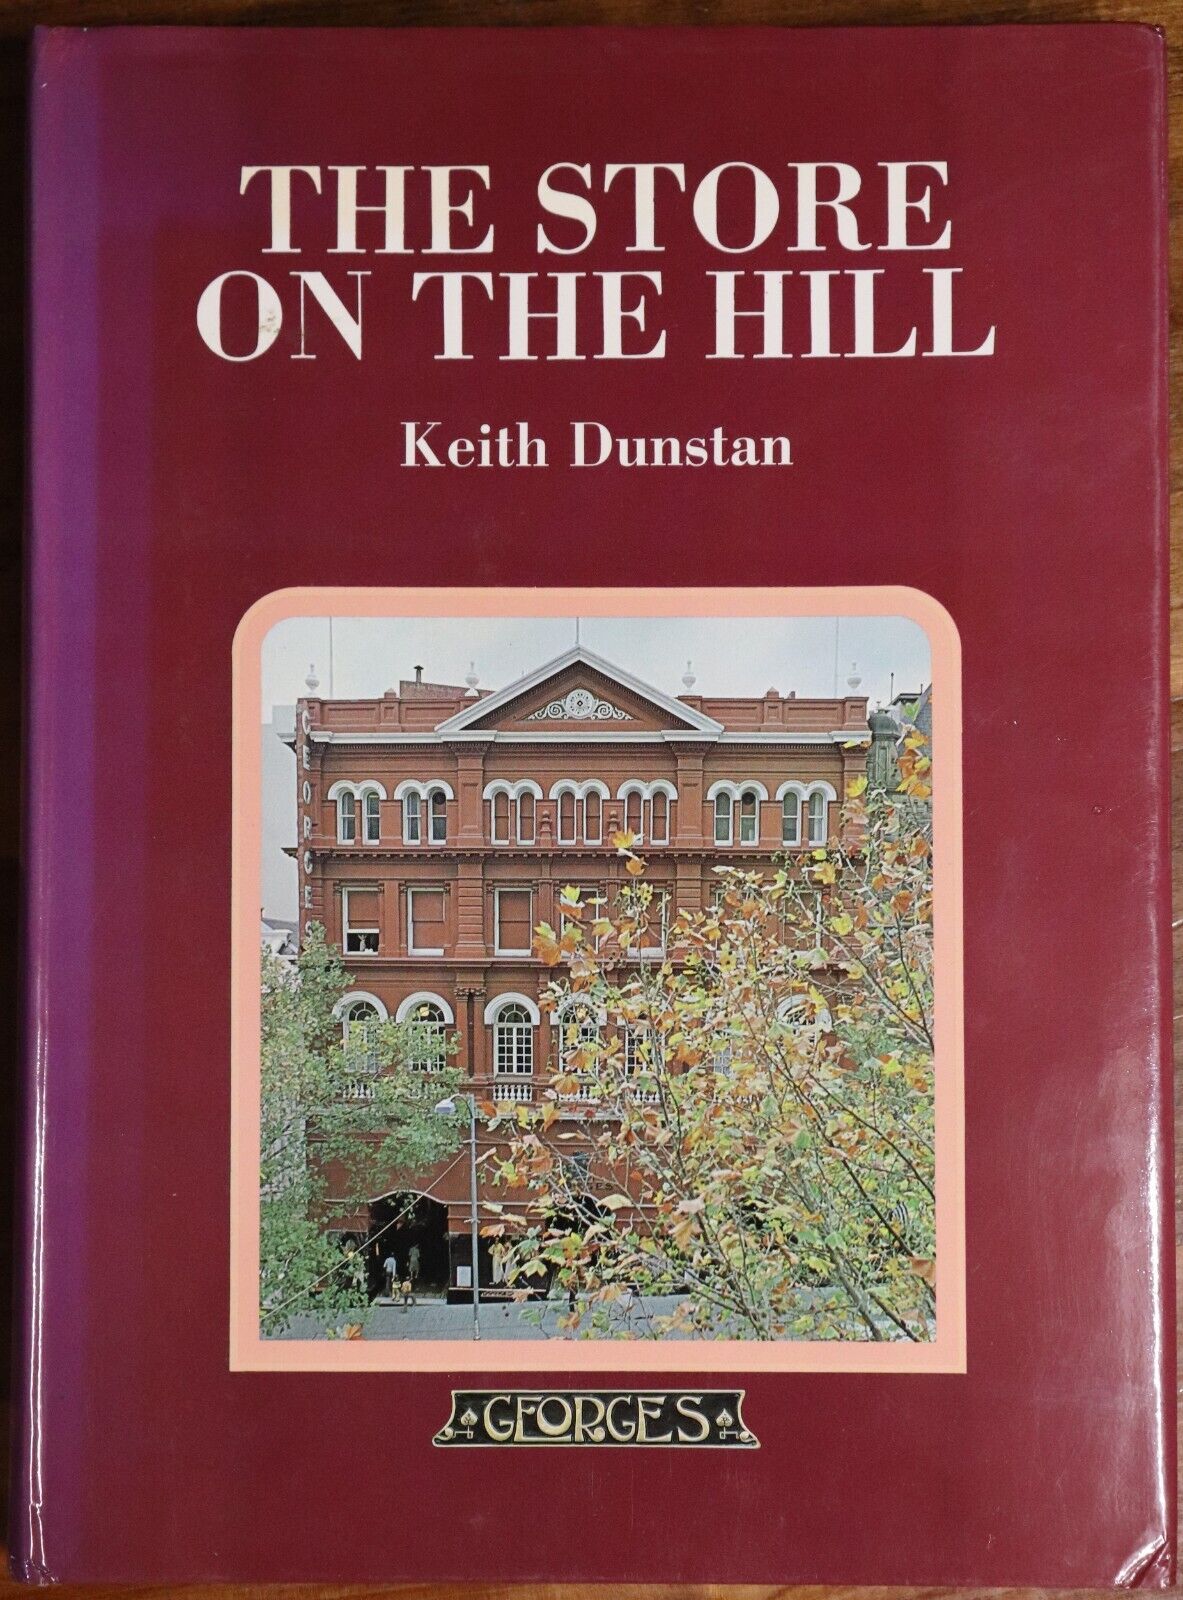 The Store On The Hill by K Dunstan - 1979 - 1st Edition Australian History Book